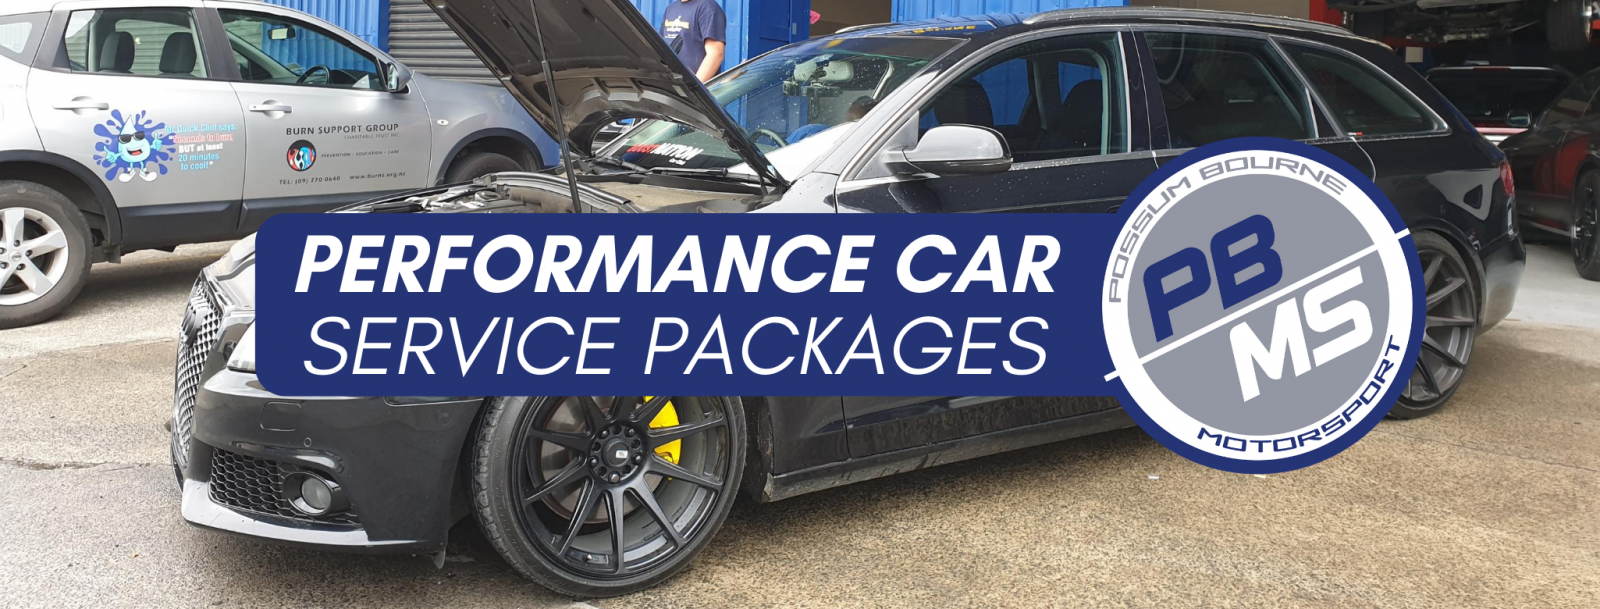 Performance car servicing packages